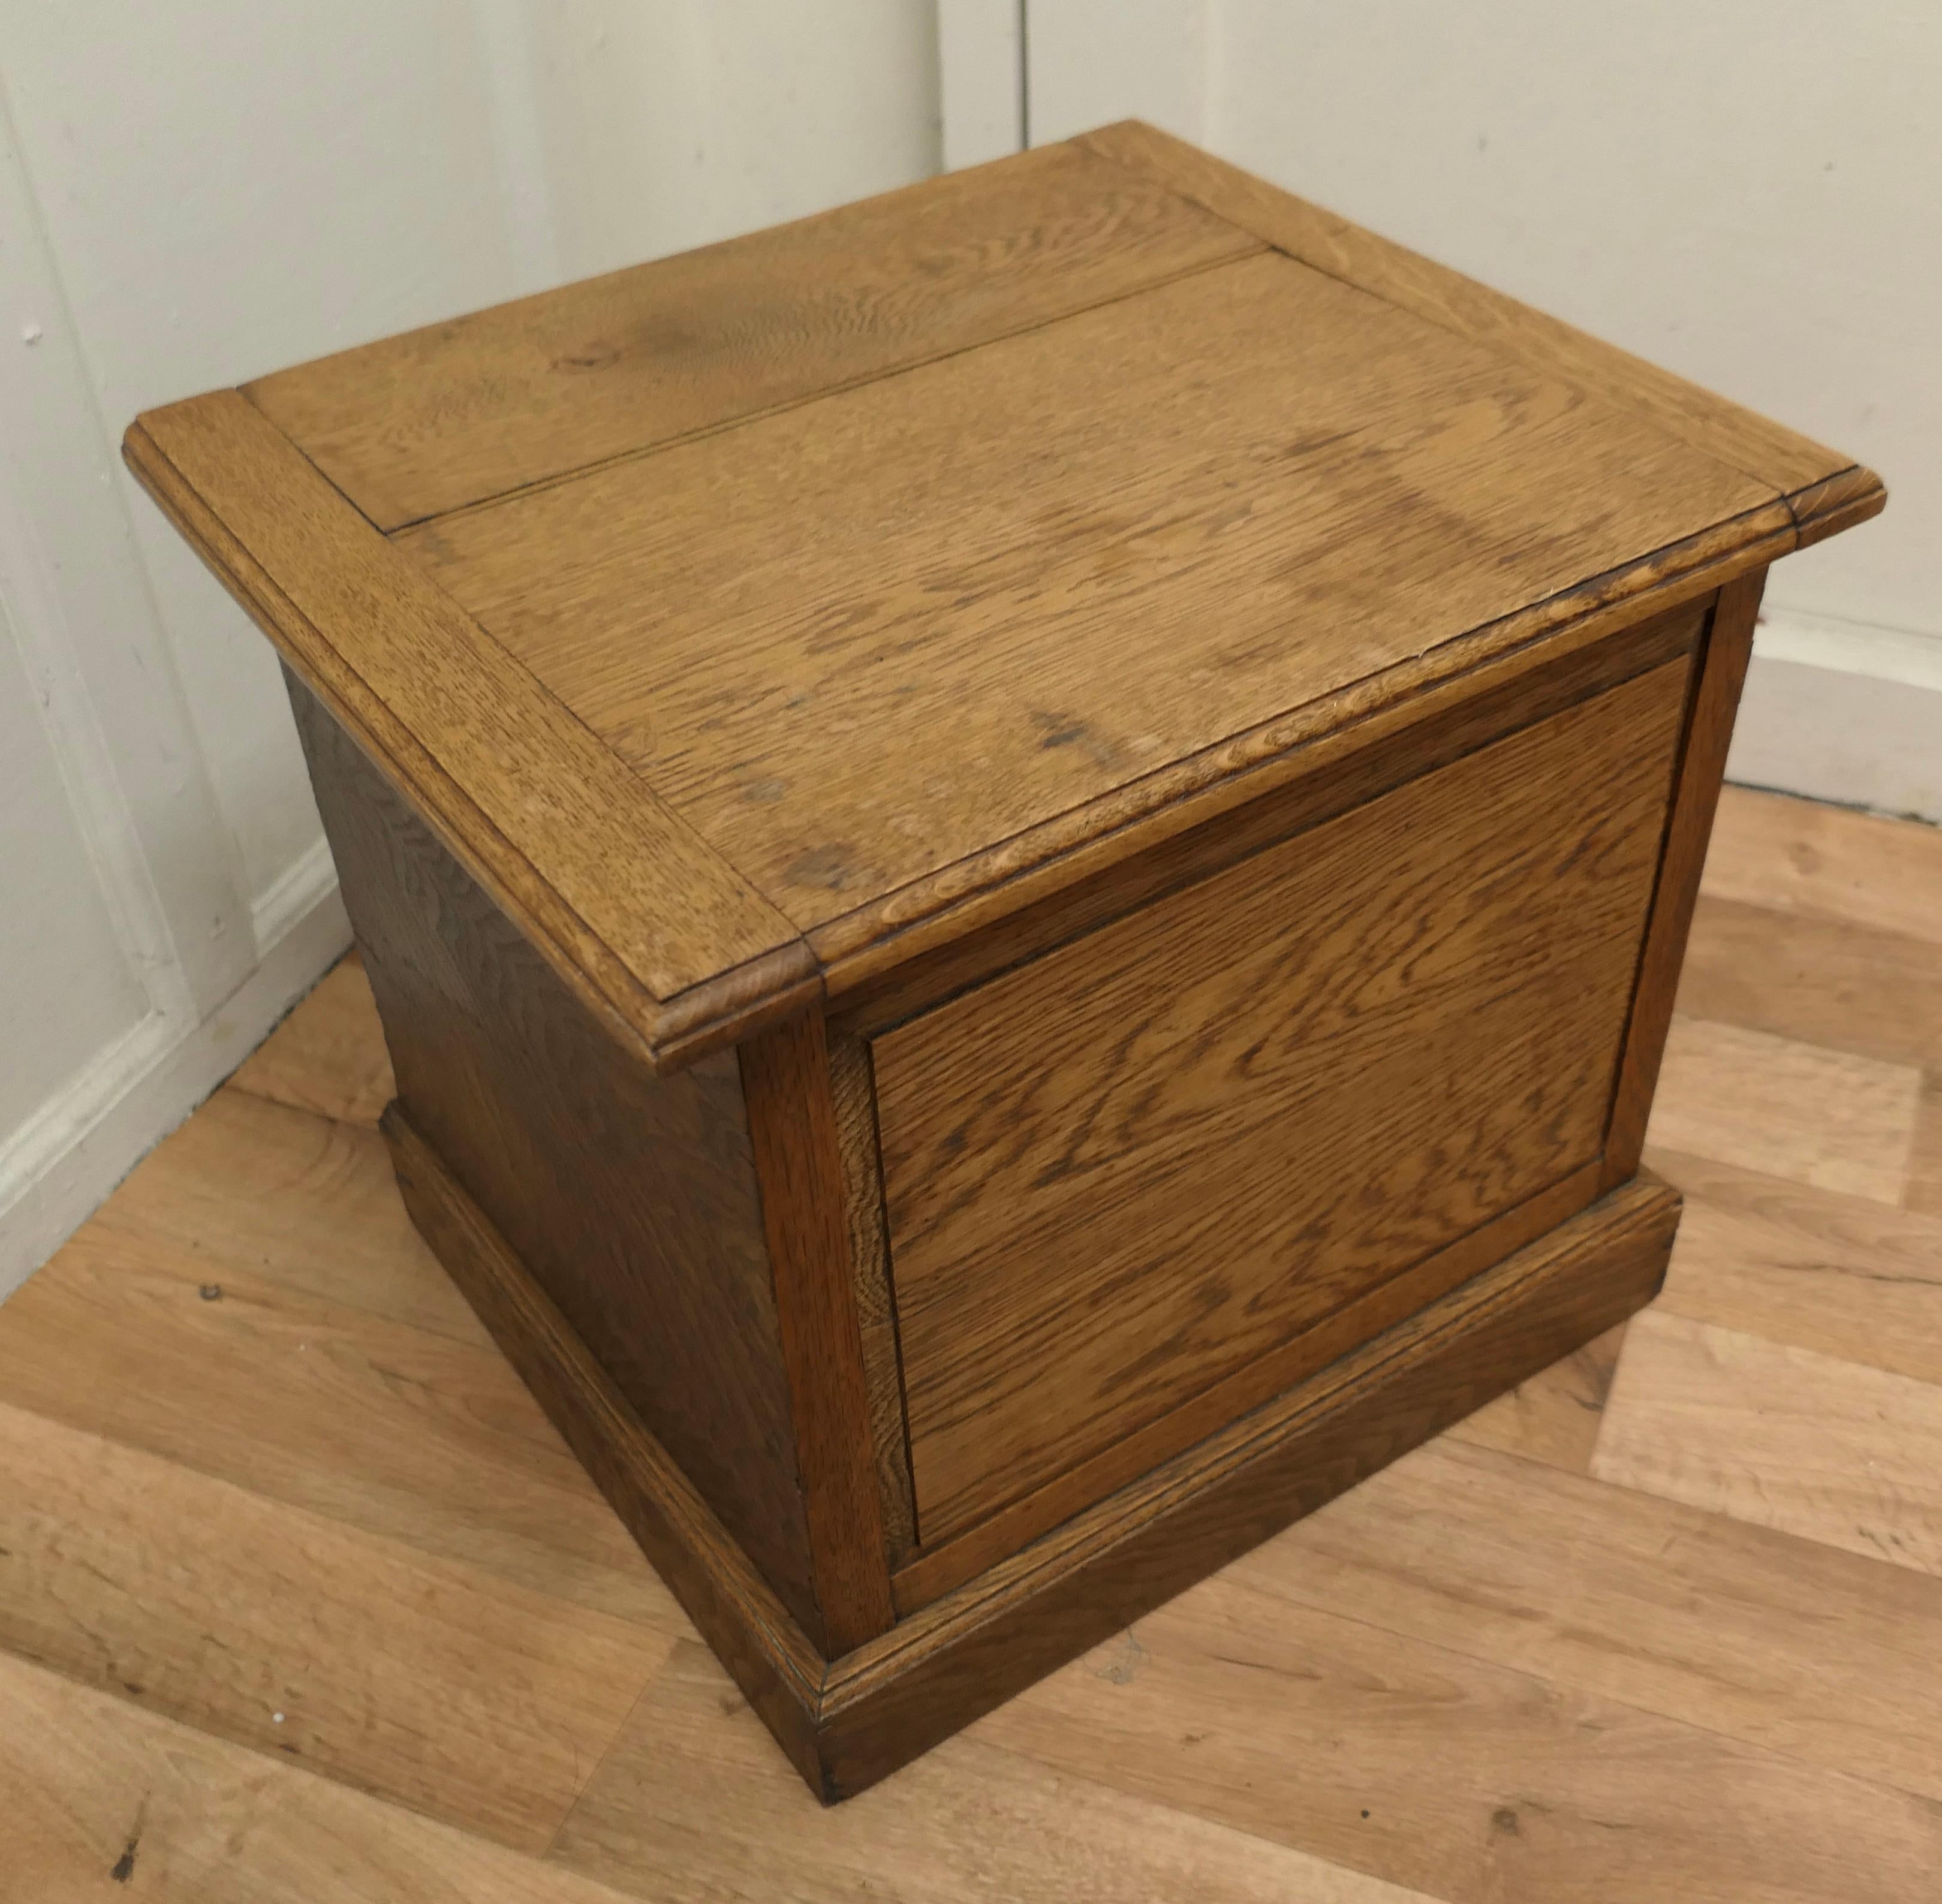 19th Century Arts and Crafts Golden Oak Log Box, Seat or Occasional Table For Sale